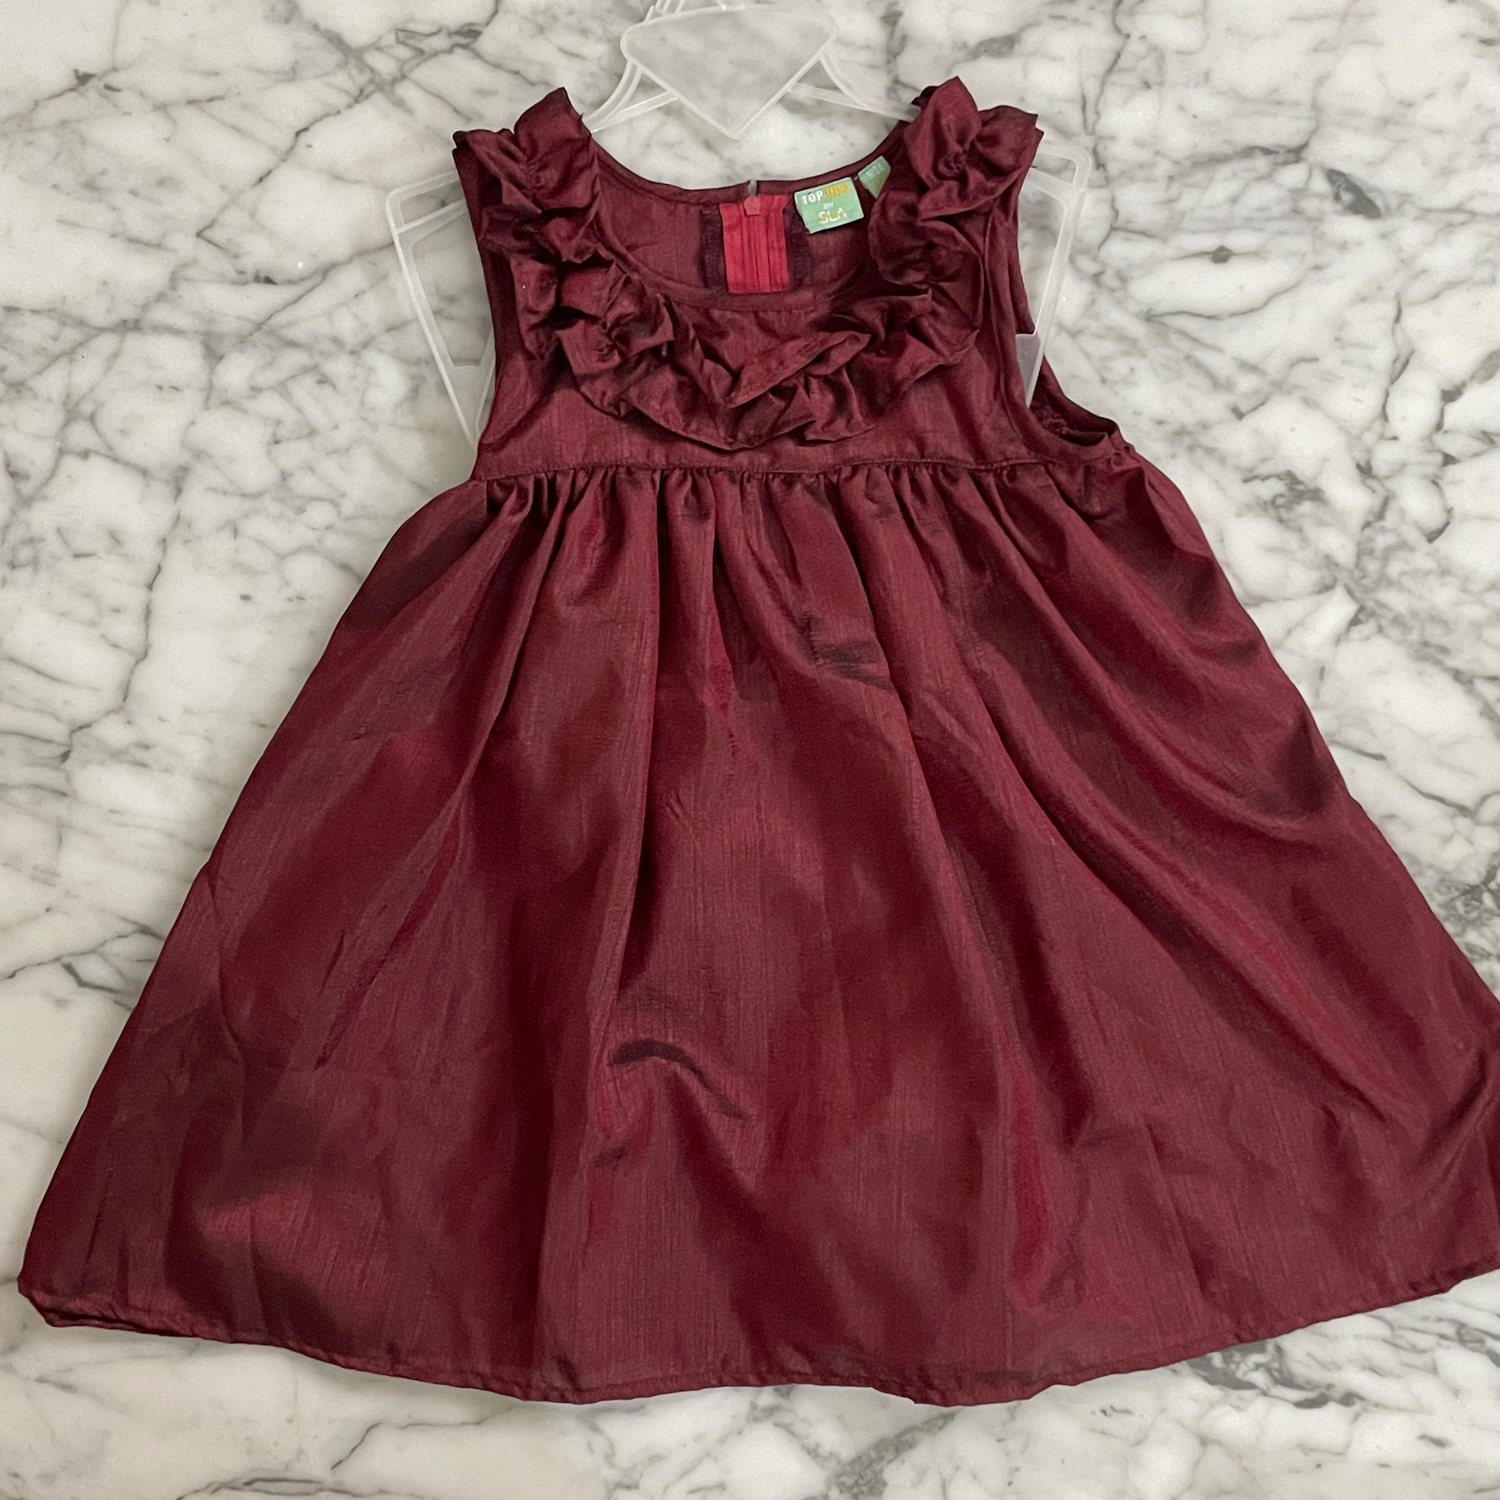 MAROON GIRLS PARTY FROCK